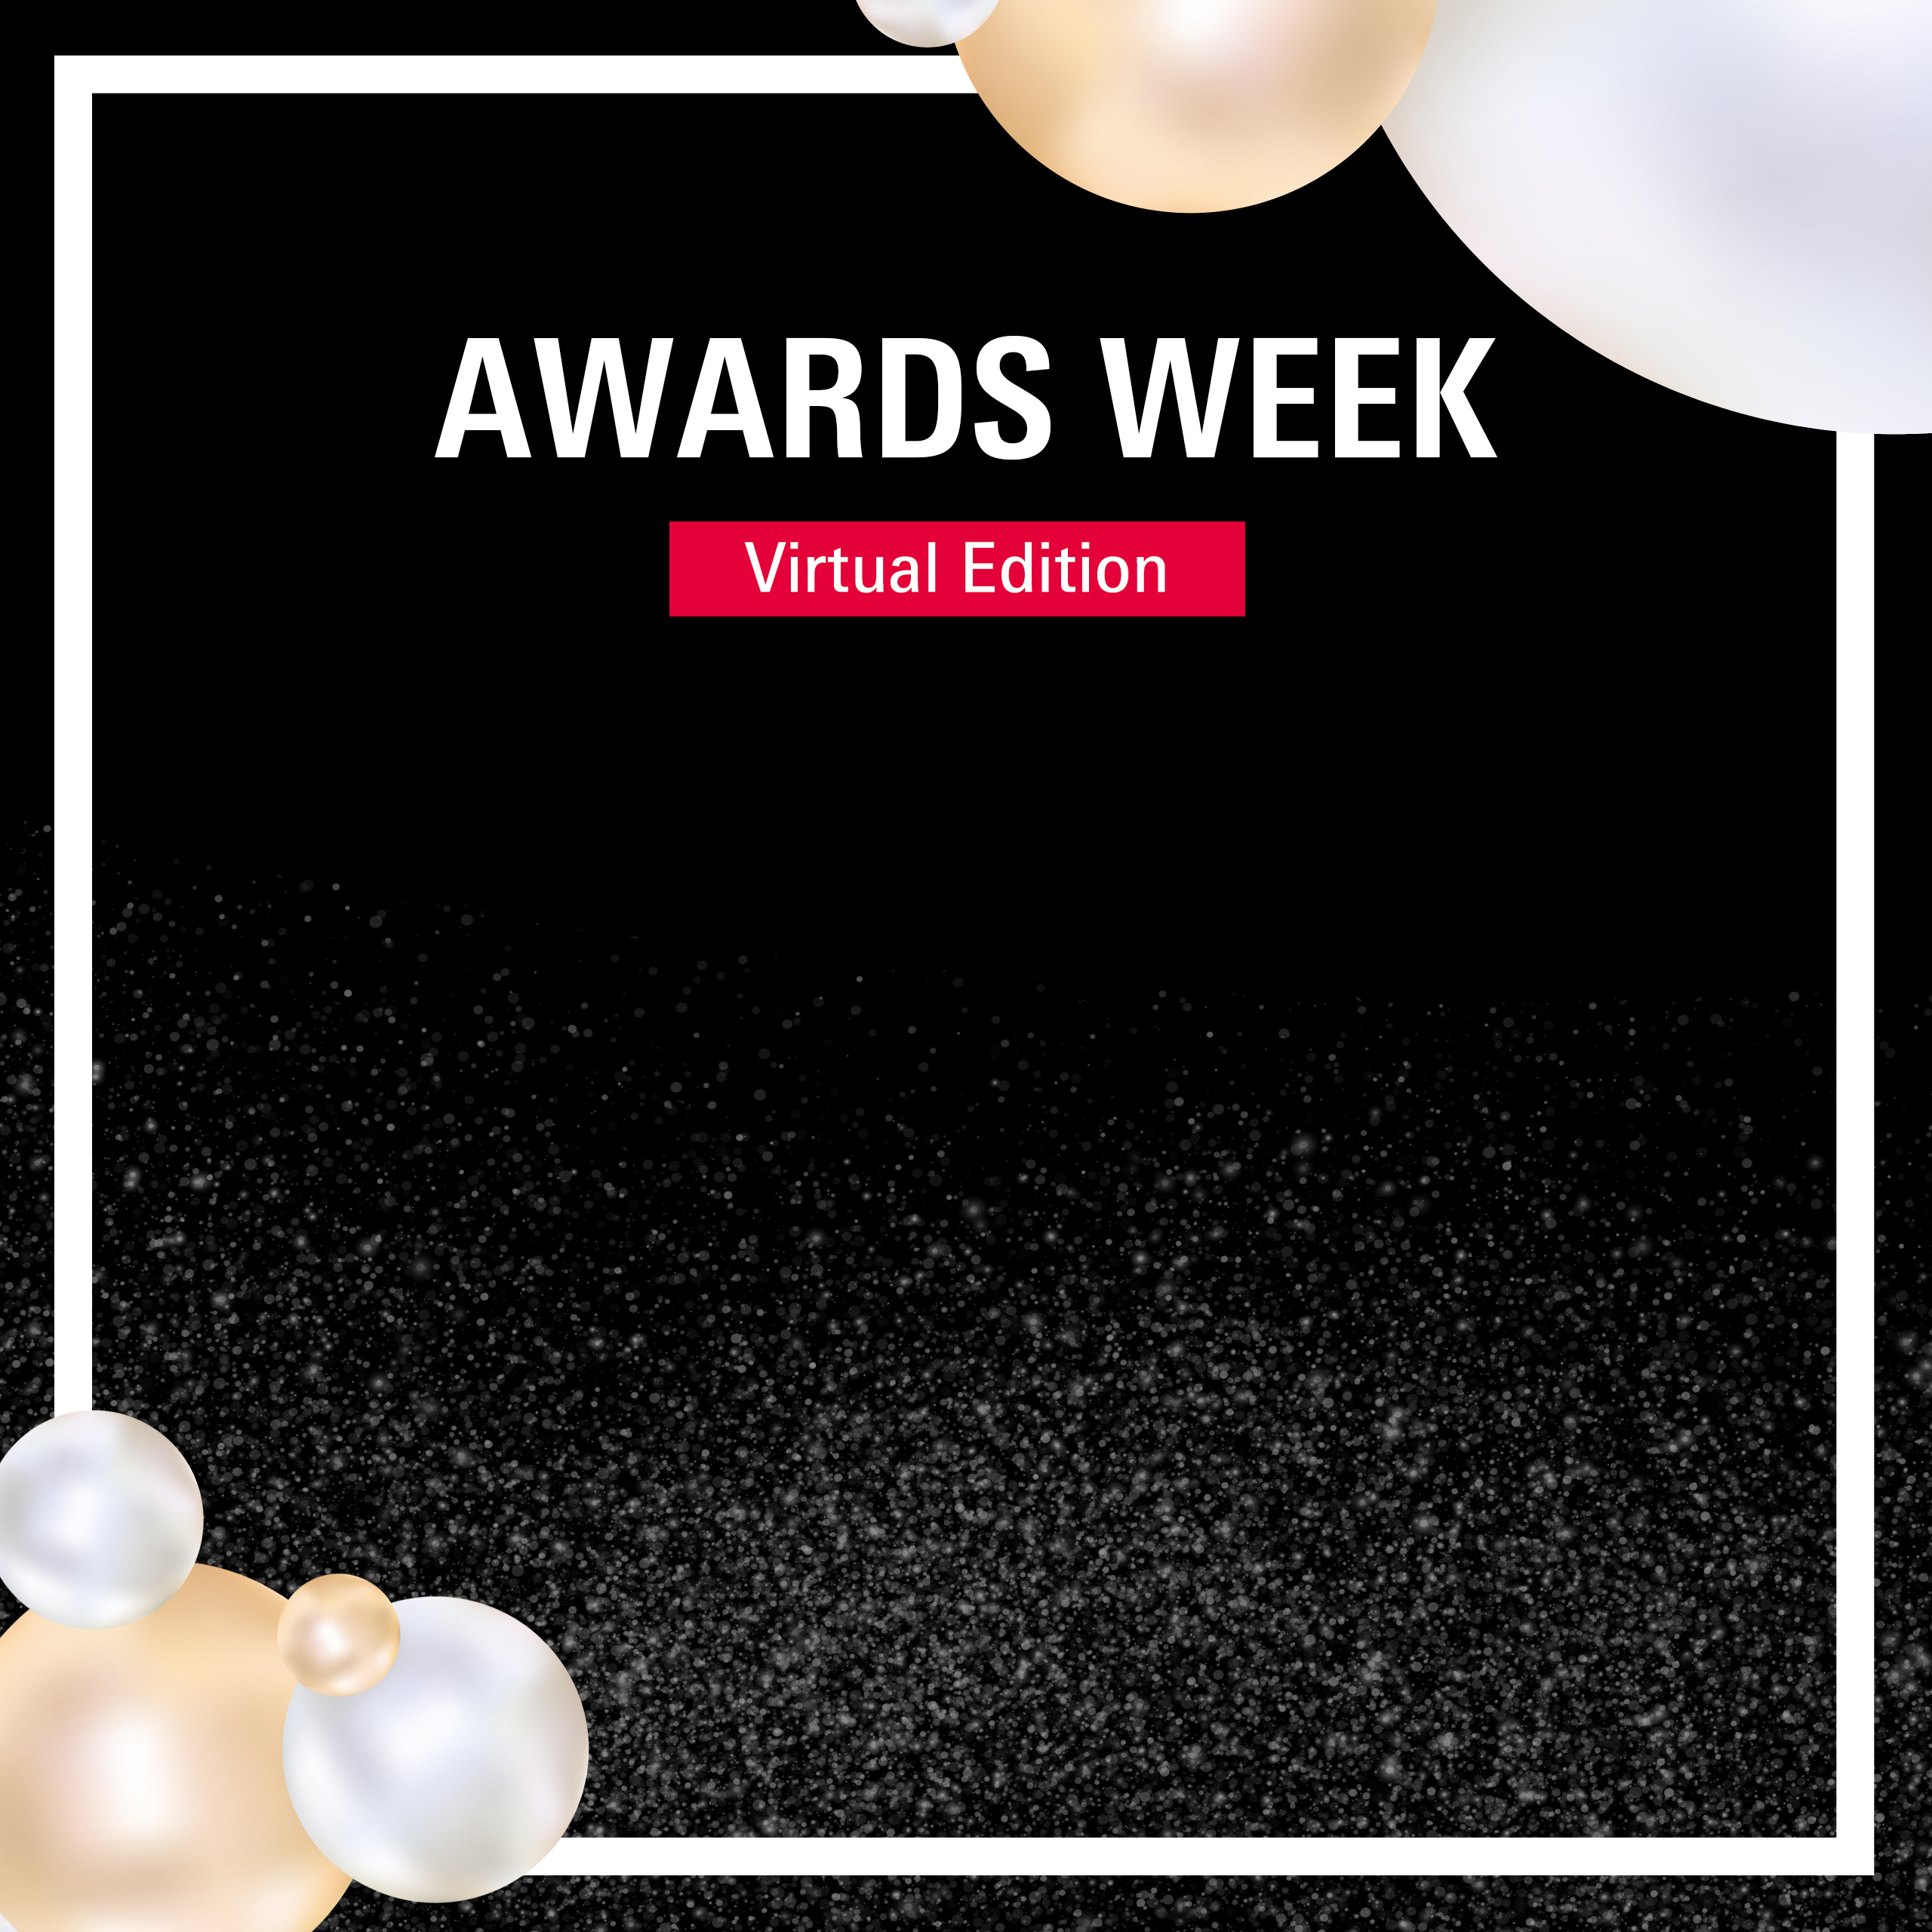 Beautyworld Middle East - Beautyworld Middle East to celebrate industry’s finest at inaugural virtual awards week